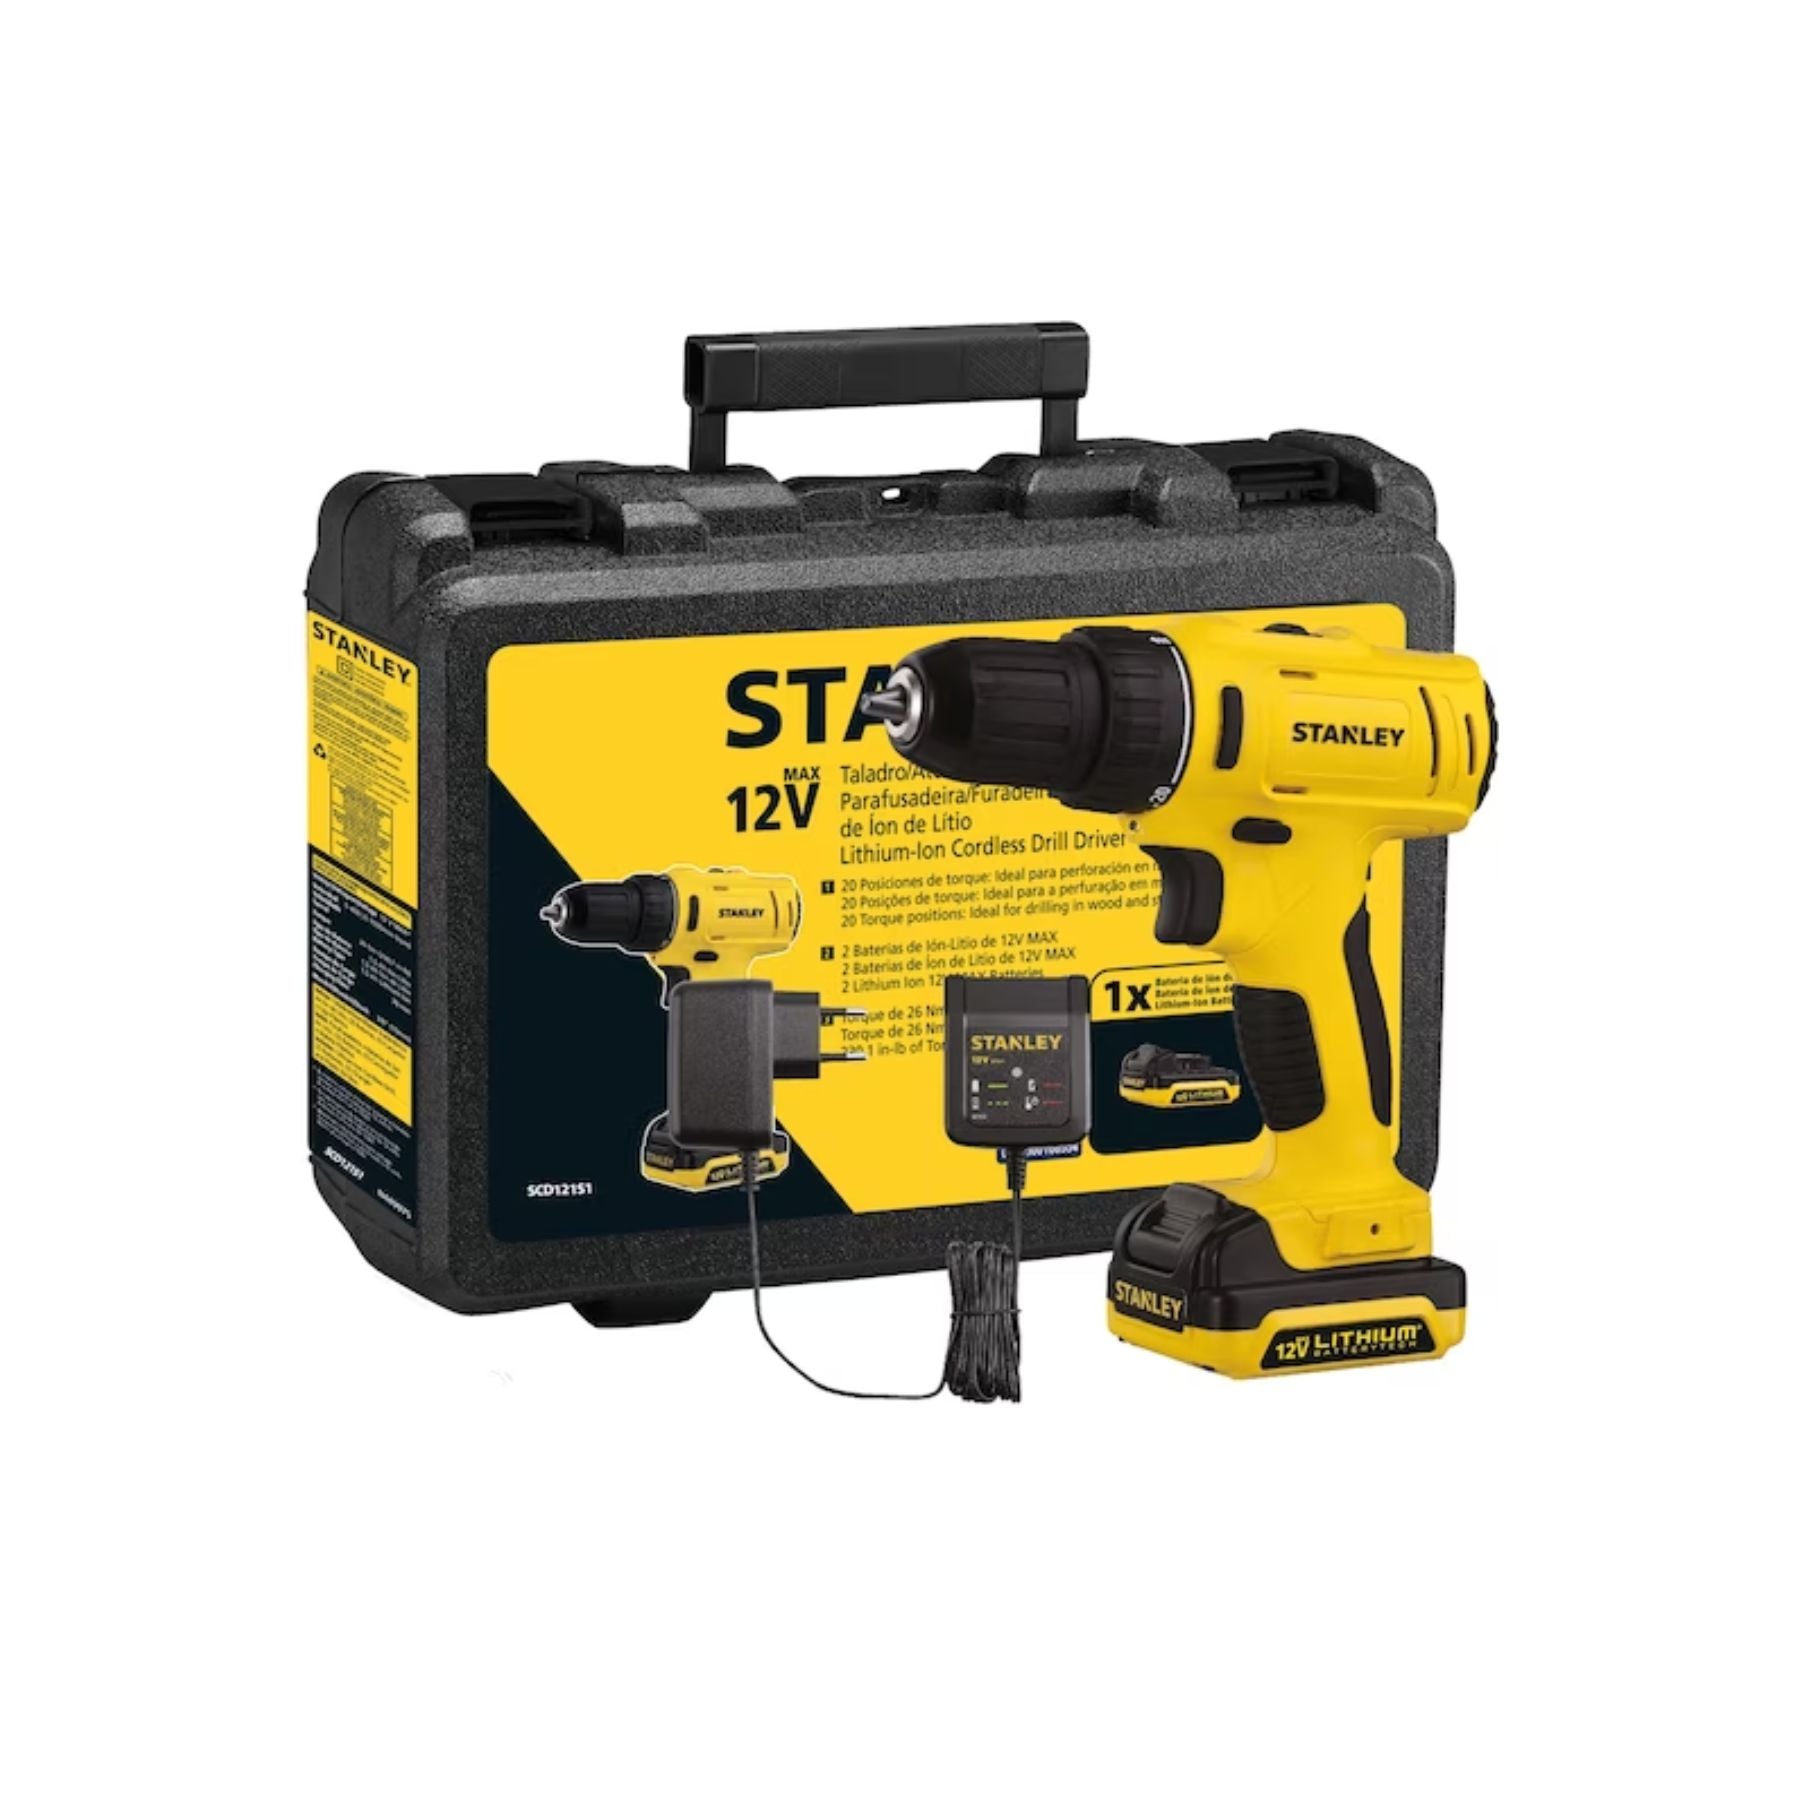 Stanley (SCI121S2-B1) 10.8V - 1.5 Ah Impact Drill driver